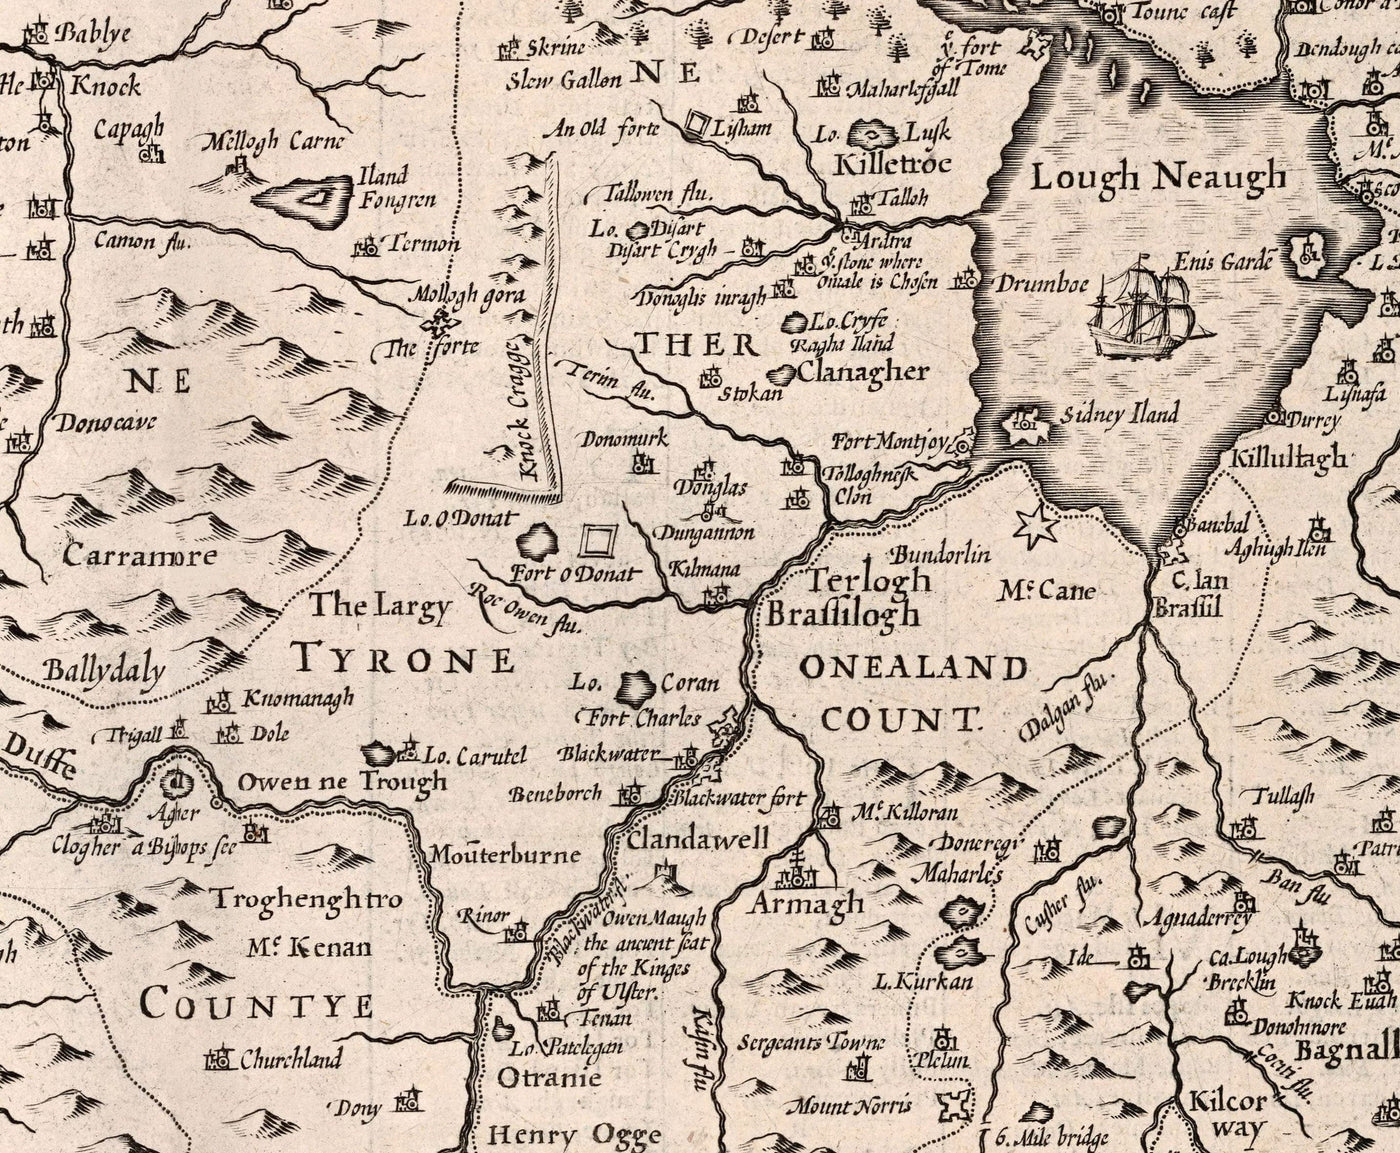 Old Monochrome Map of Ulster, Northern Ireland in 1611 by John Speed - Belfast, Derry (not Londonderry), County Antrim & Down